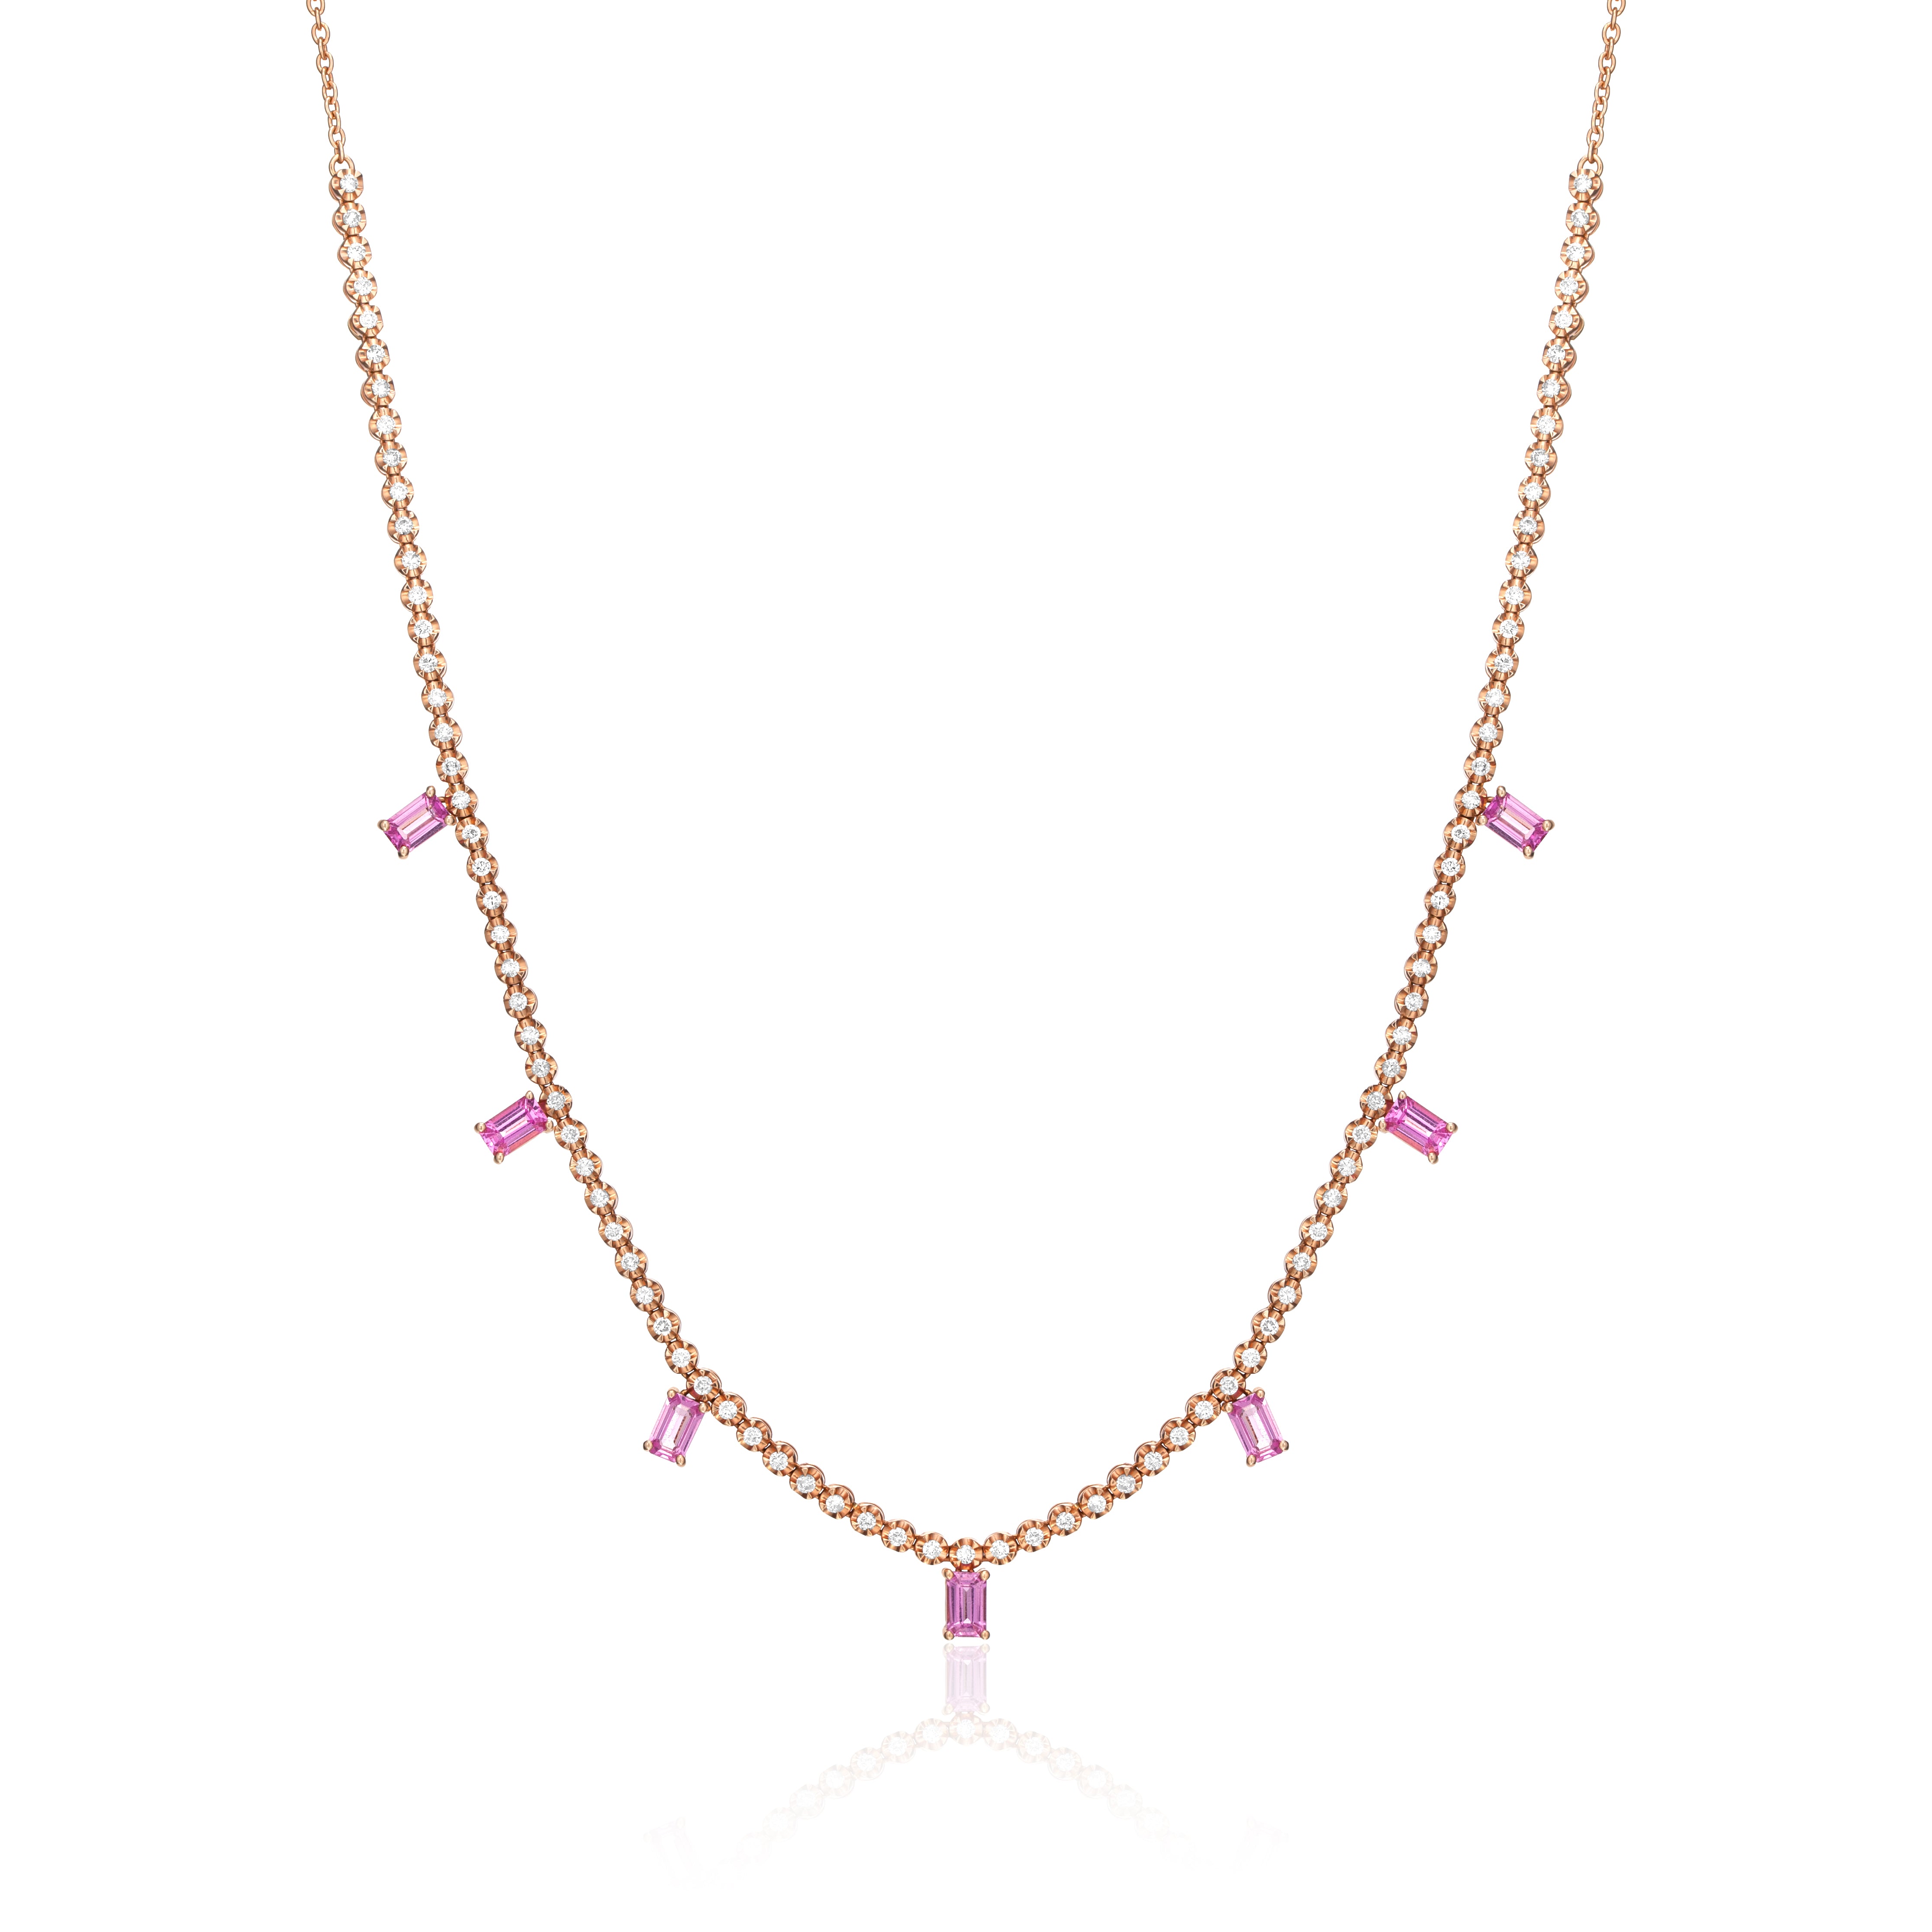 Pink sapphire and diamond tennis necklace